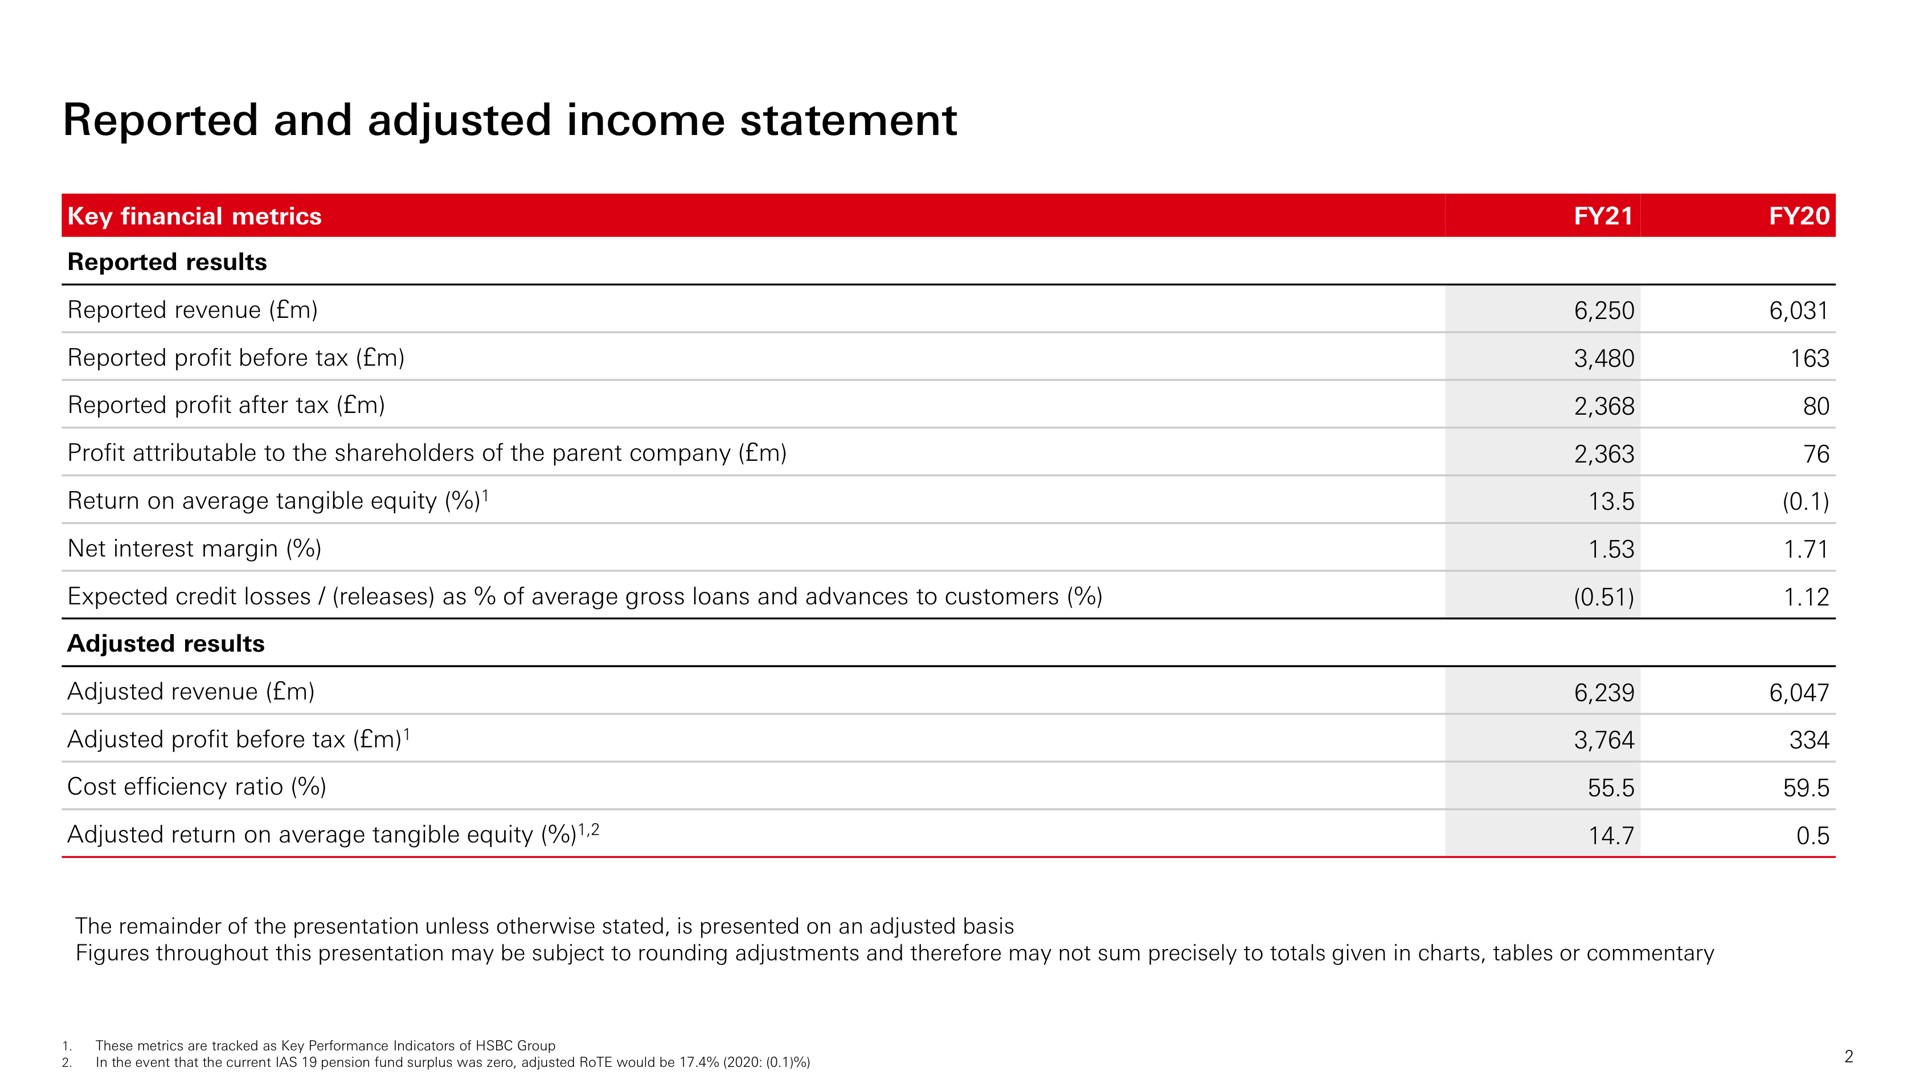 reported and adjusted income statement | HSBC